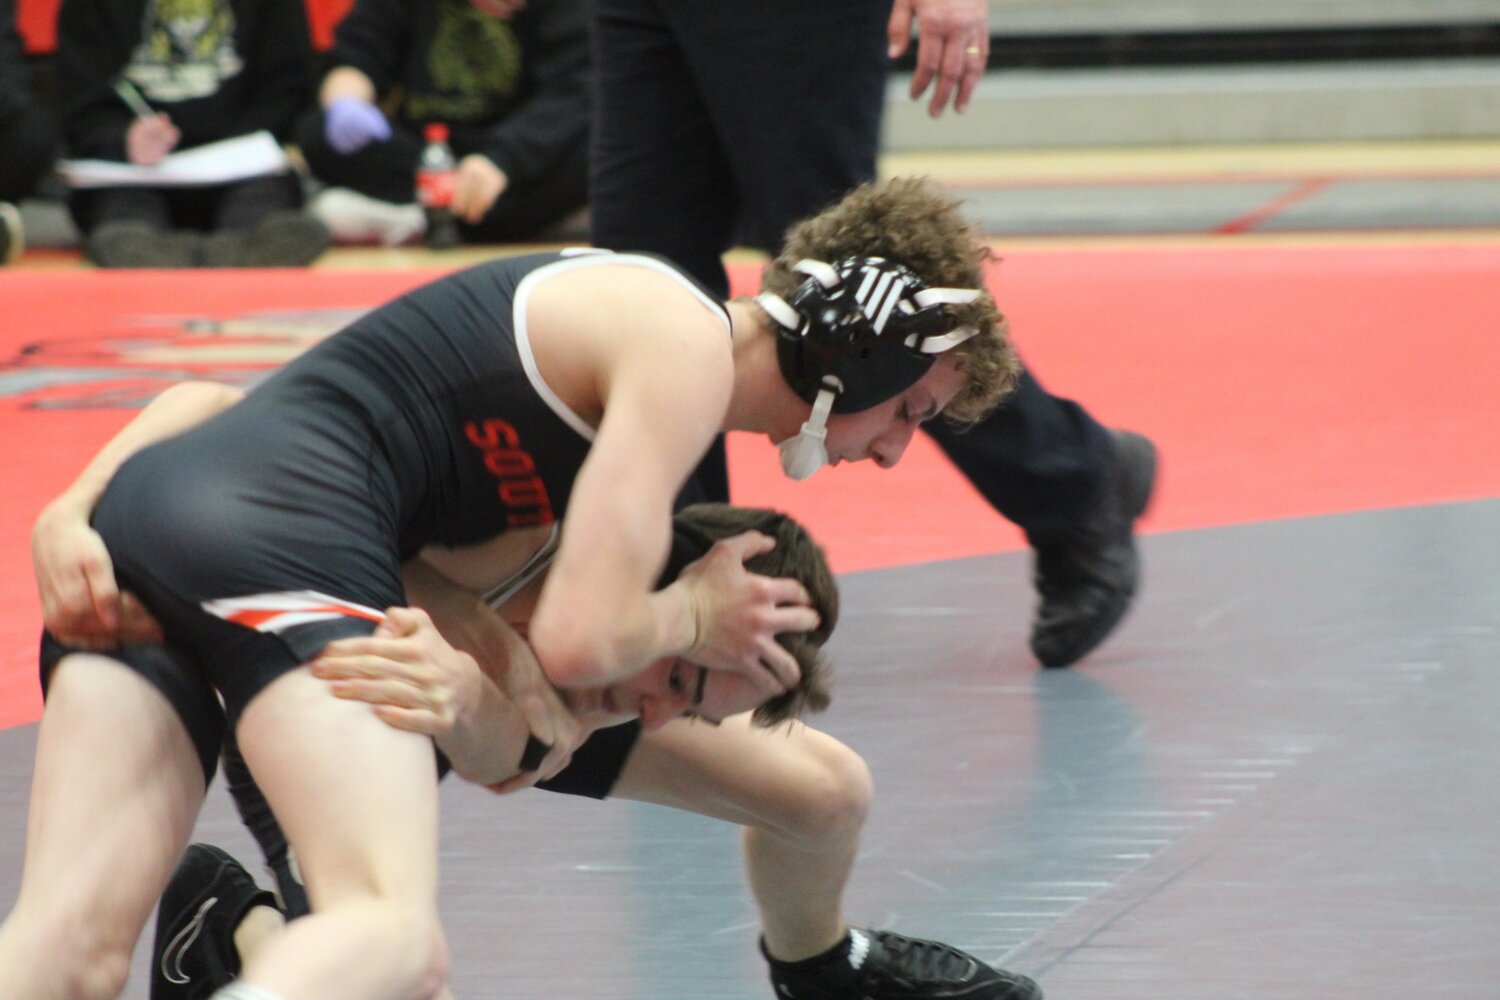 Brier Riggle kept the match alive for South with his win at 120 pounds.